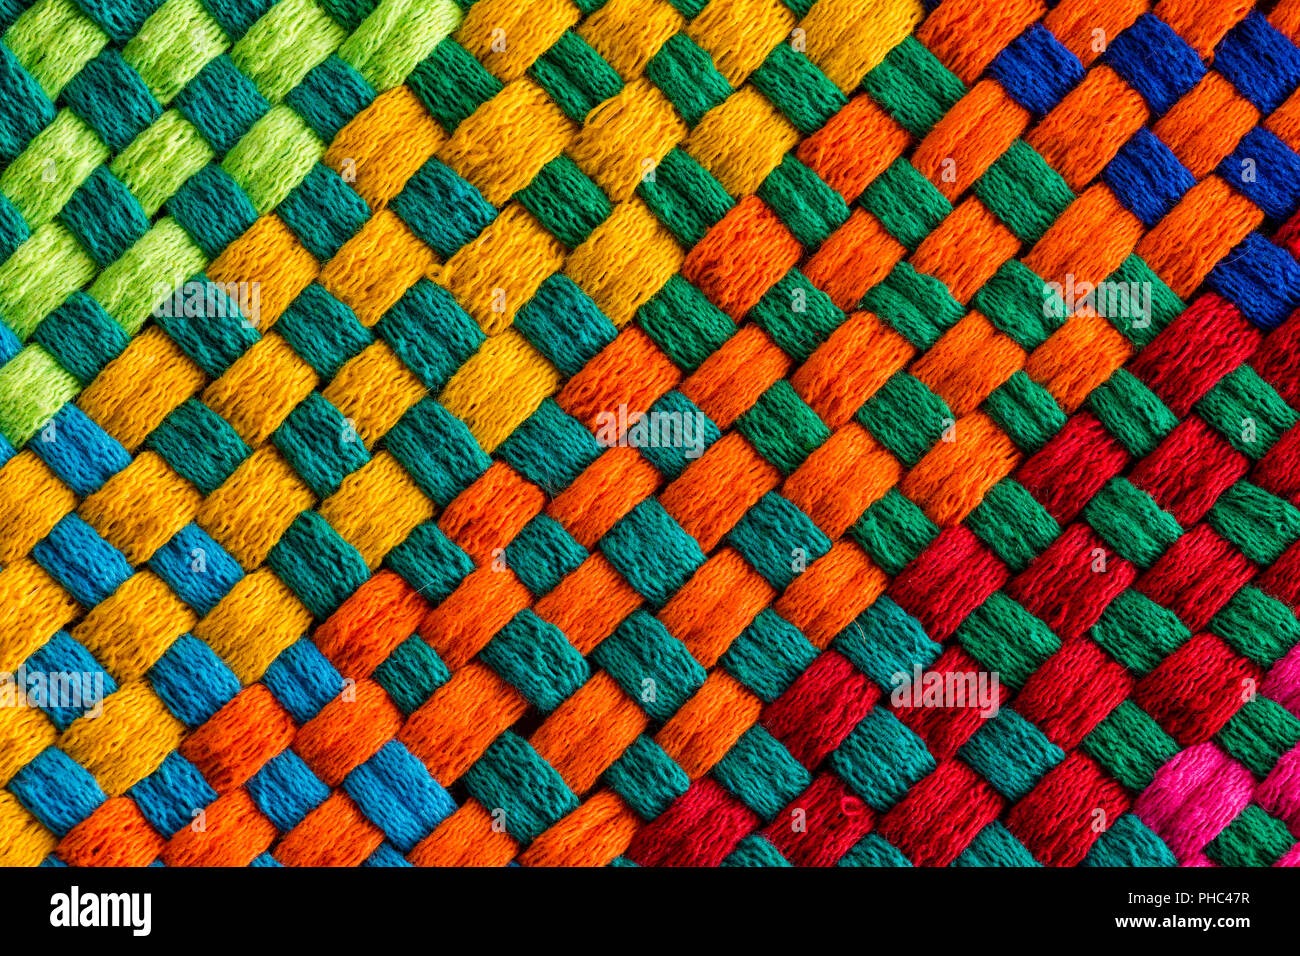 Background completely covered by diagonally angled rainbow colored interweaving threads of stitched fabric Stock Photo